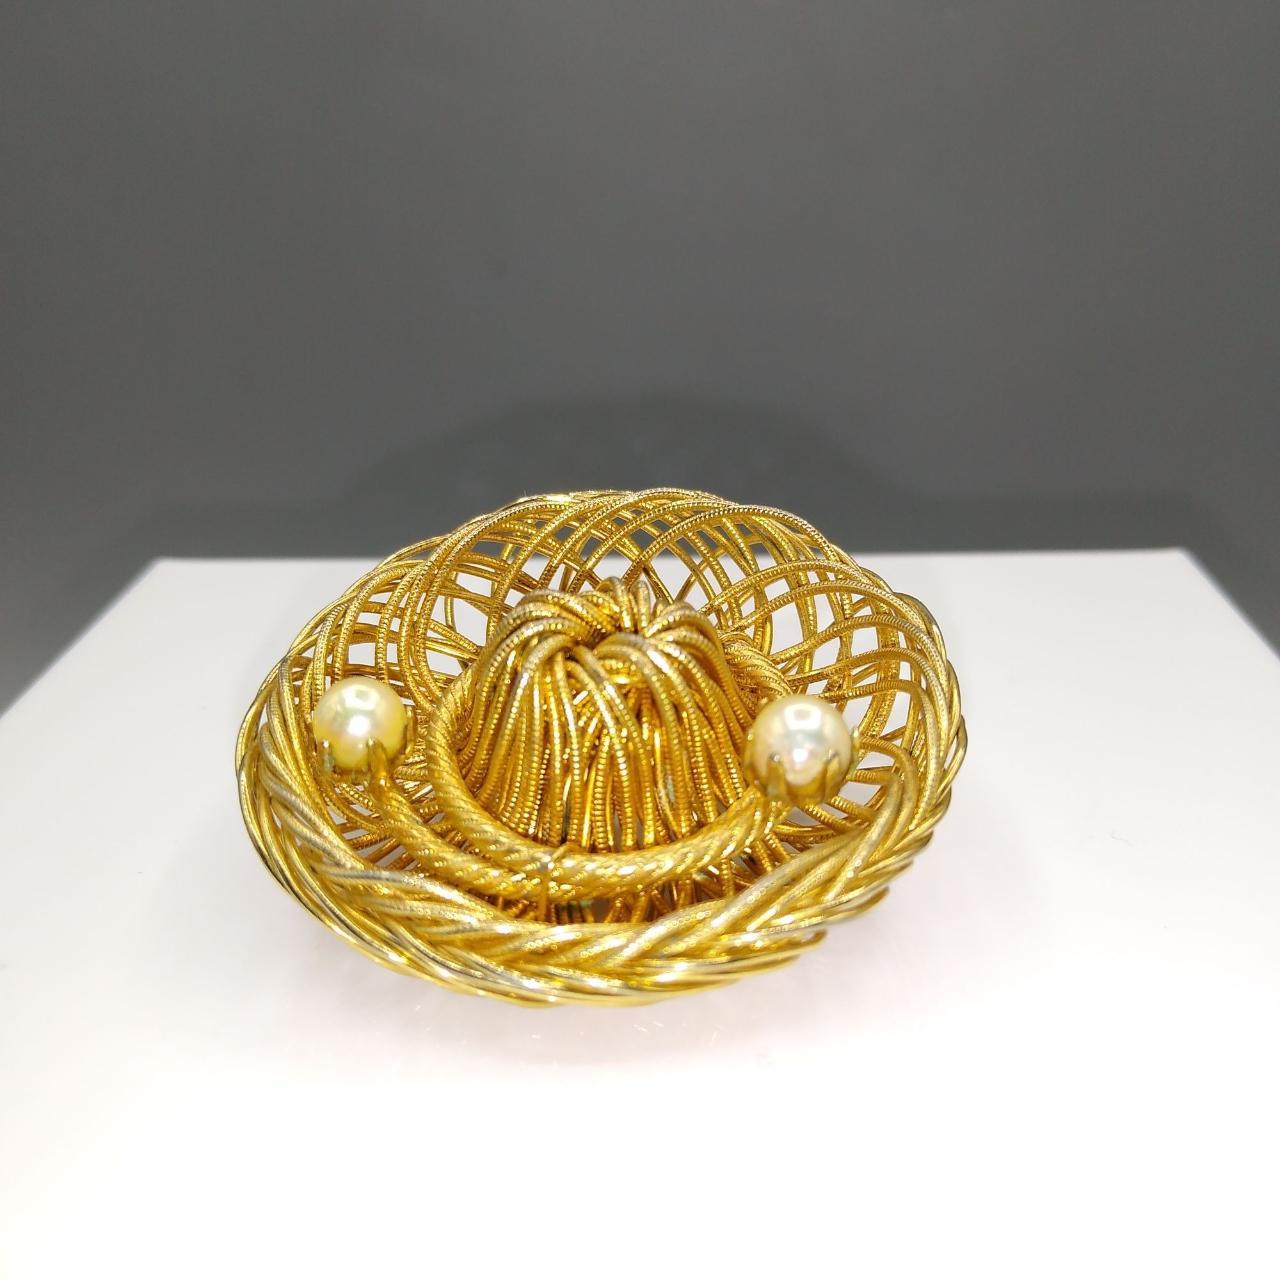 Product Image 2 - Vintage Brooch, Gold Wire Spiral